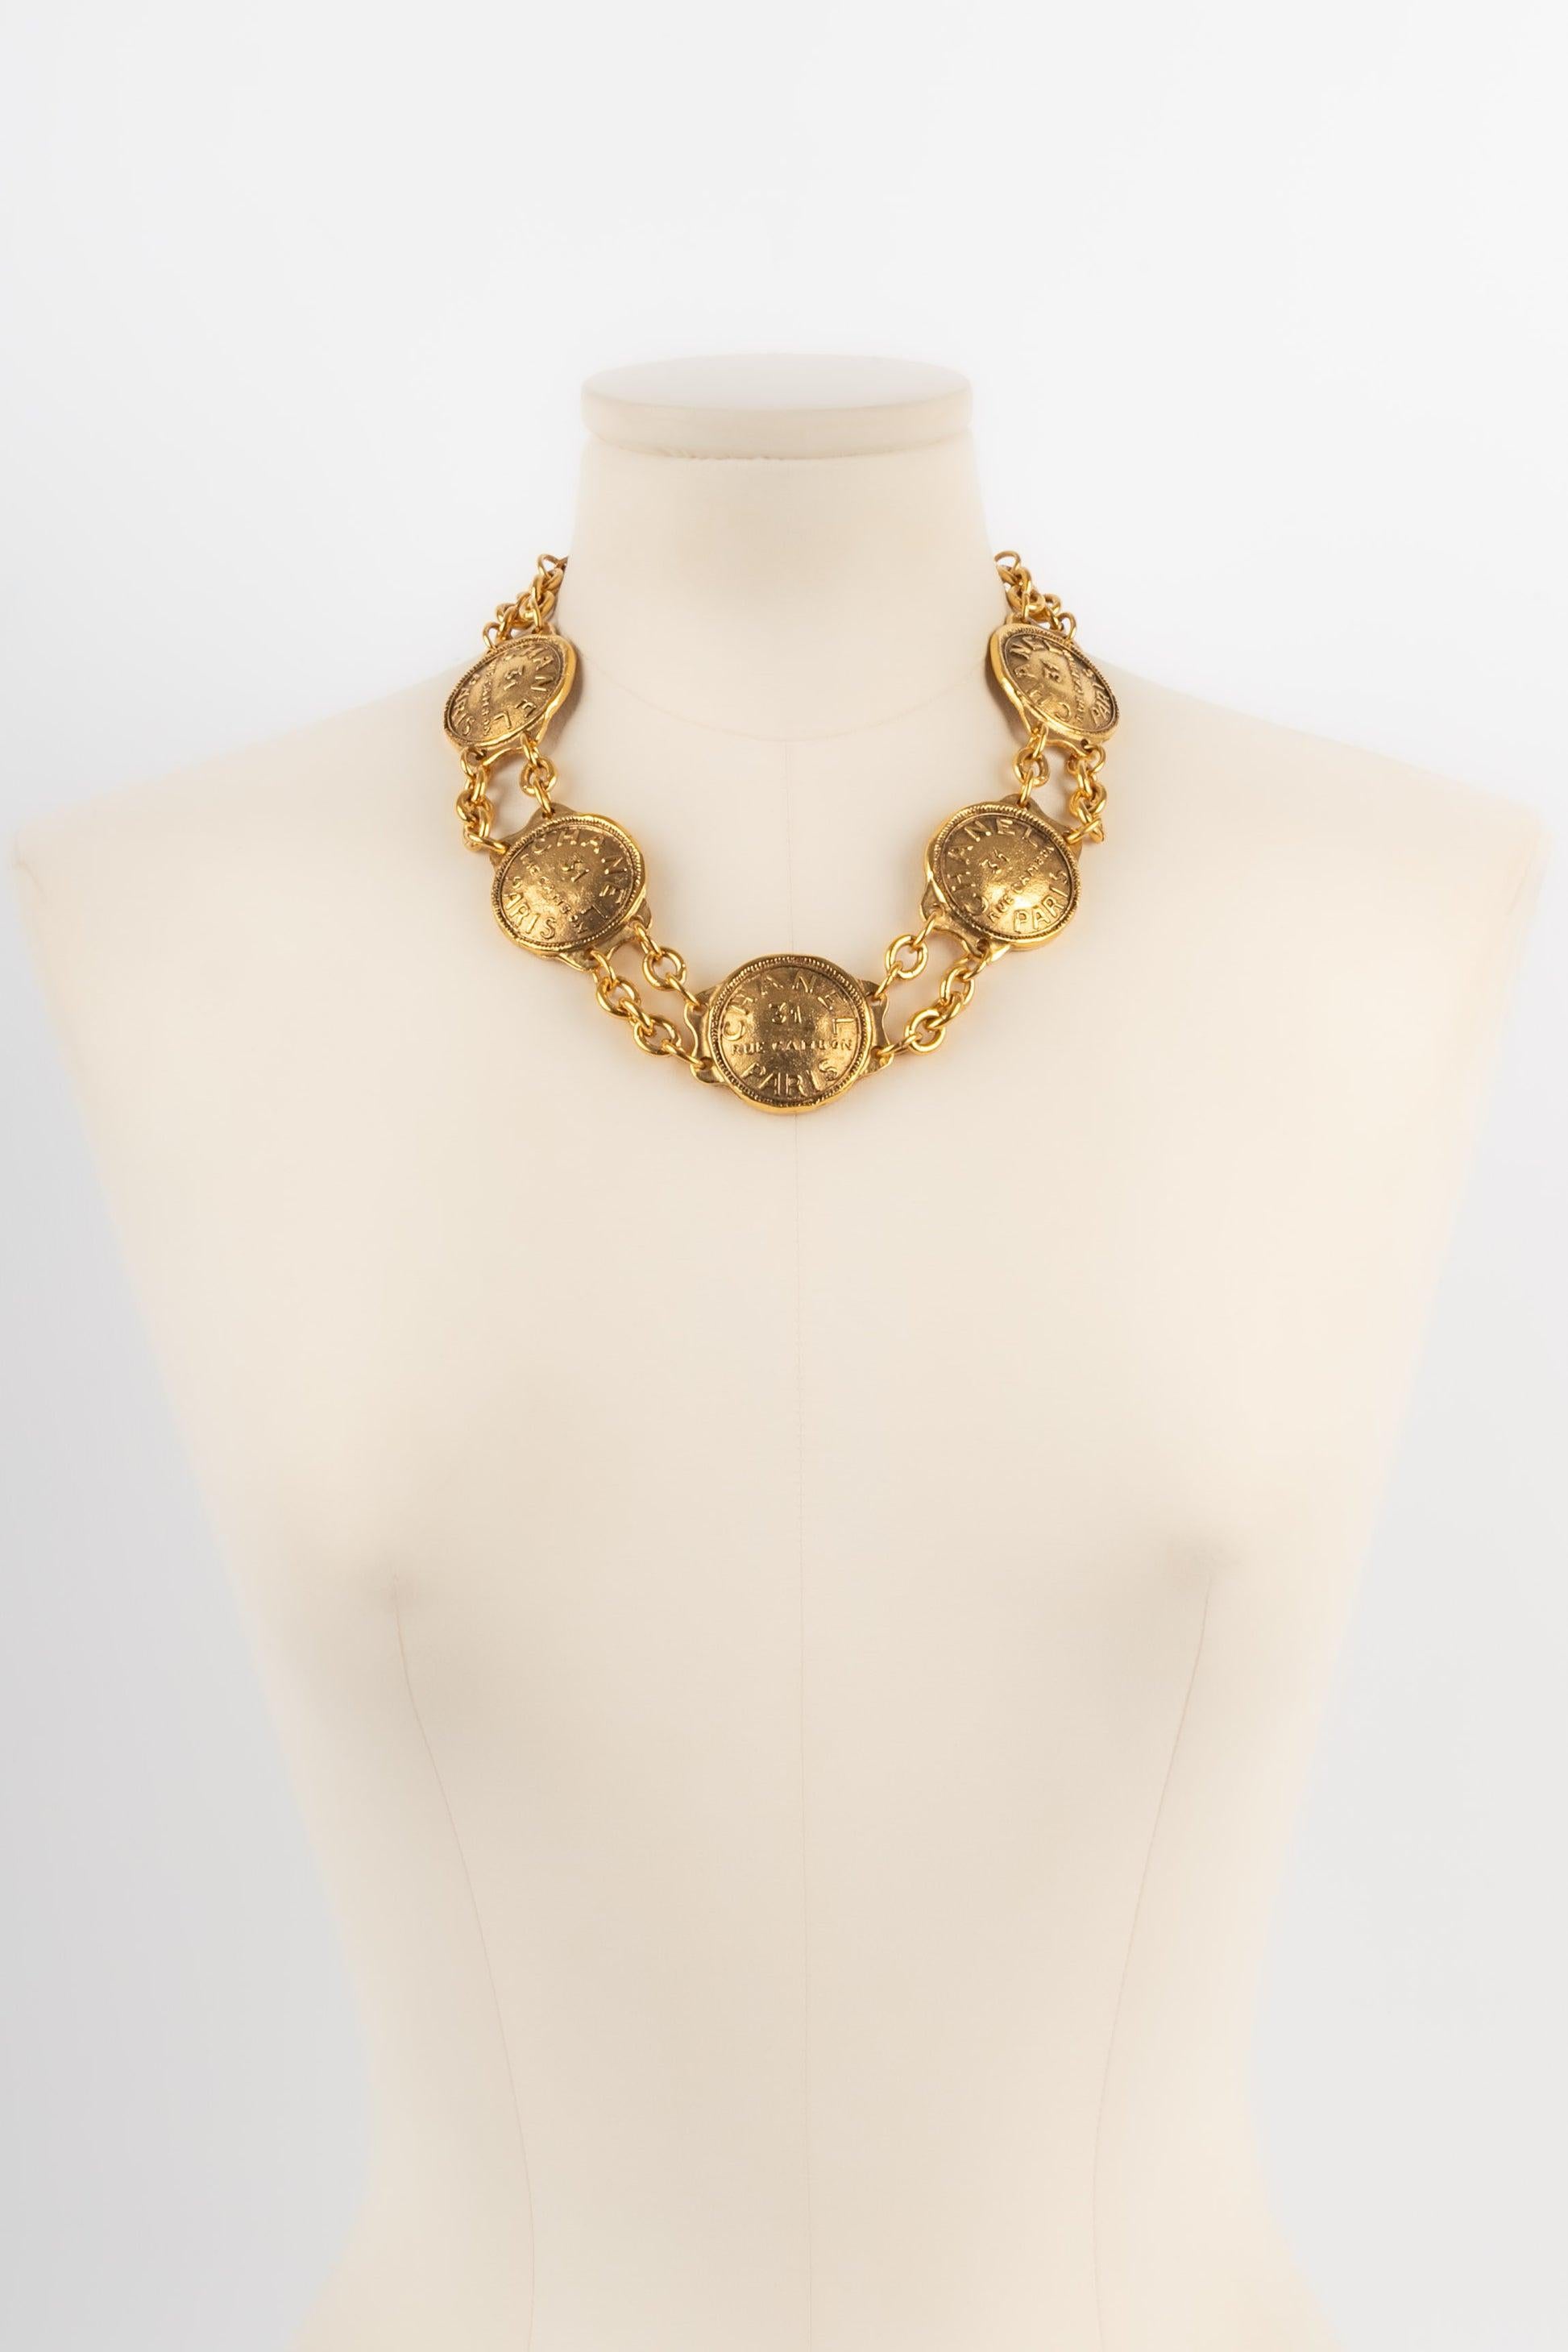 Women's Chanel Short Necklace in Golden Metal with 